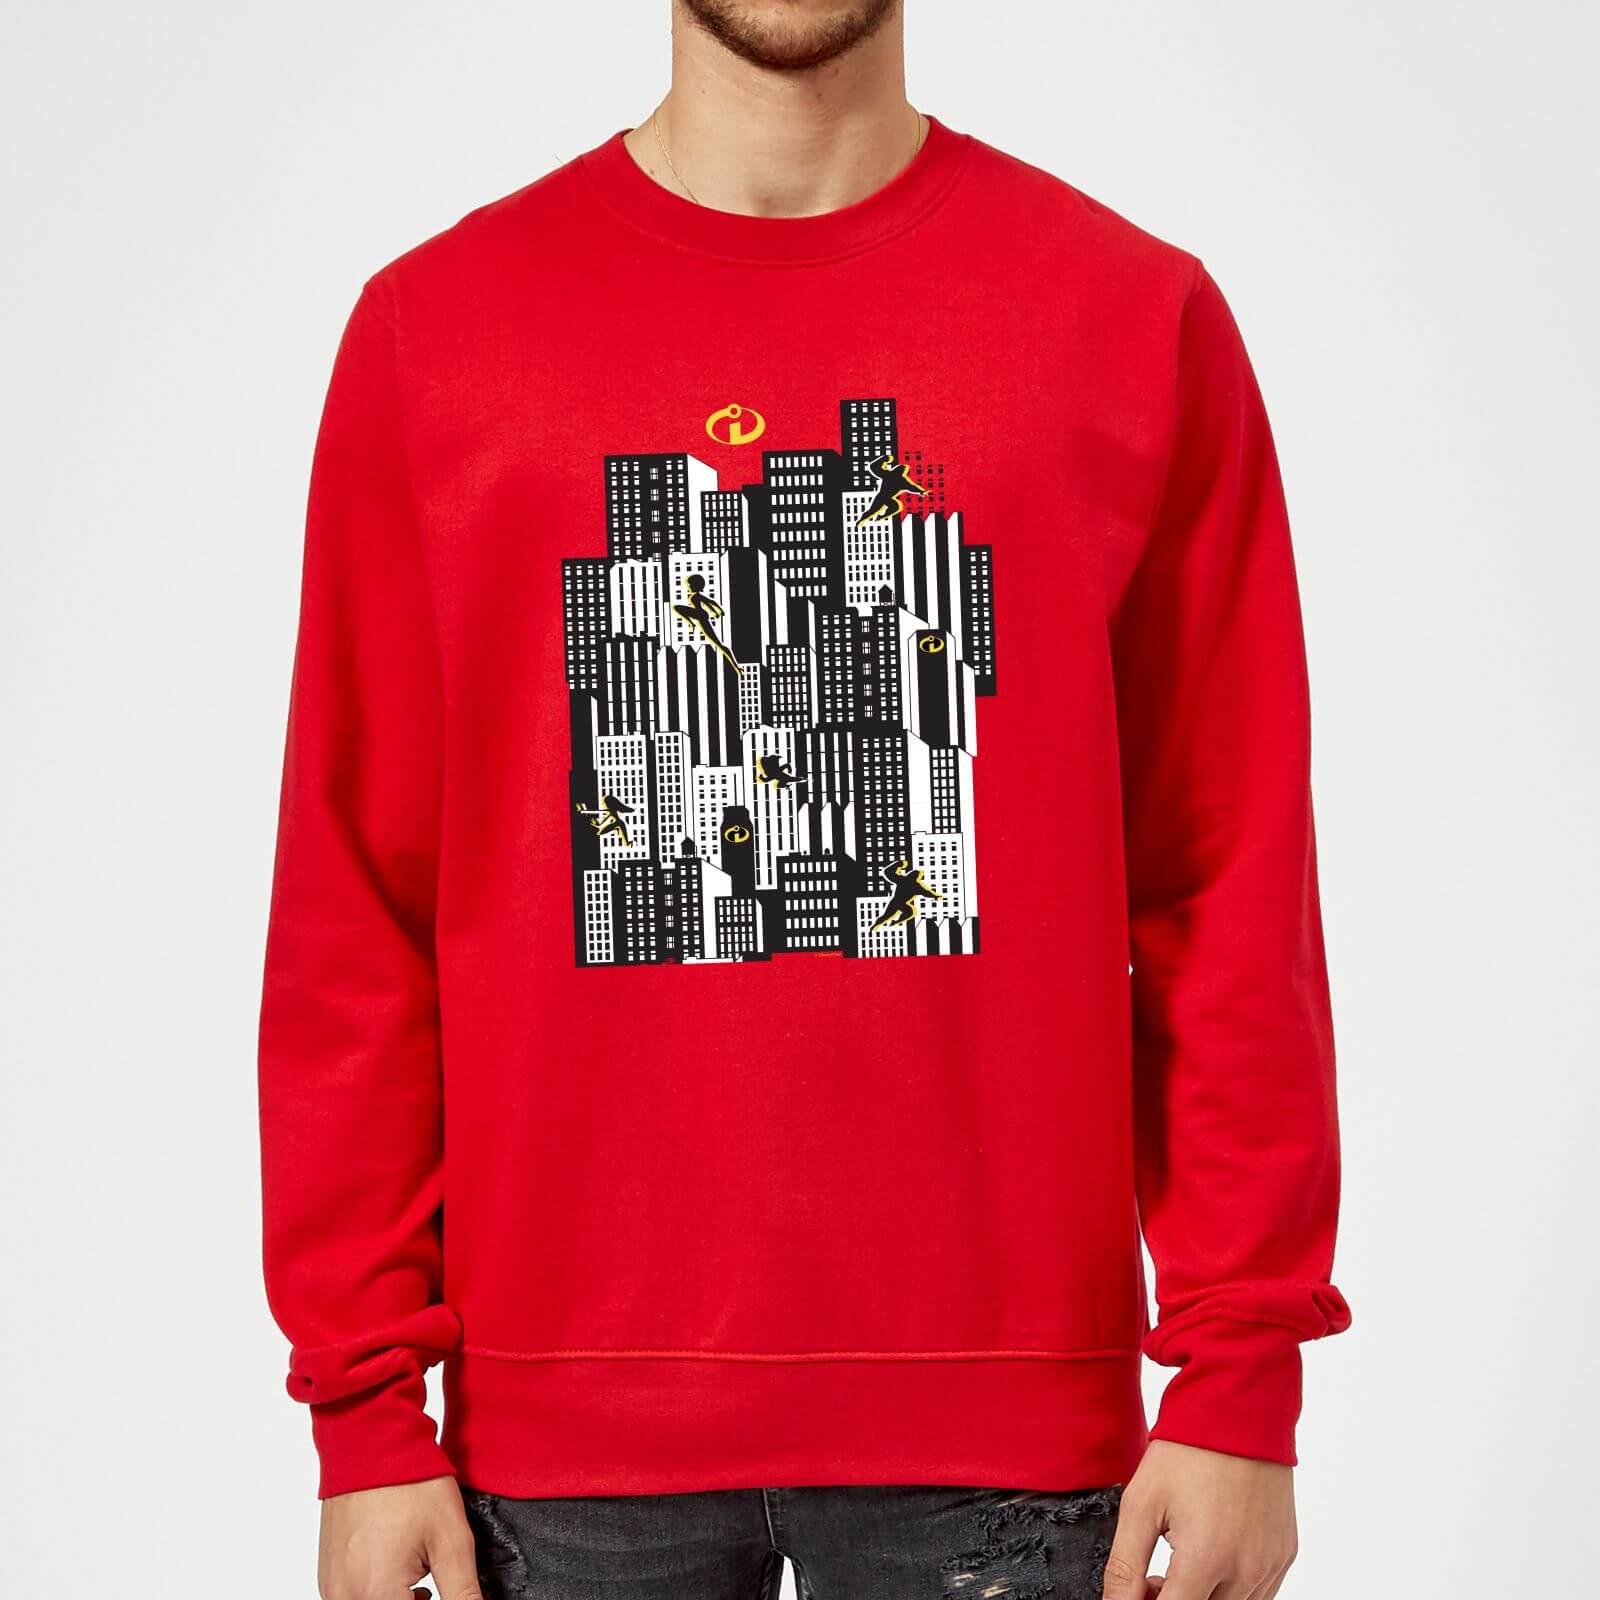 The Incredibles 2 Skyline Sweatshirt - Red - M - Red